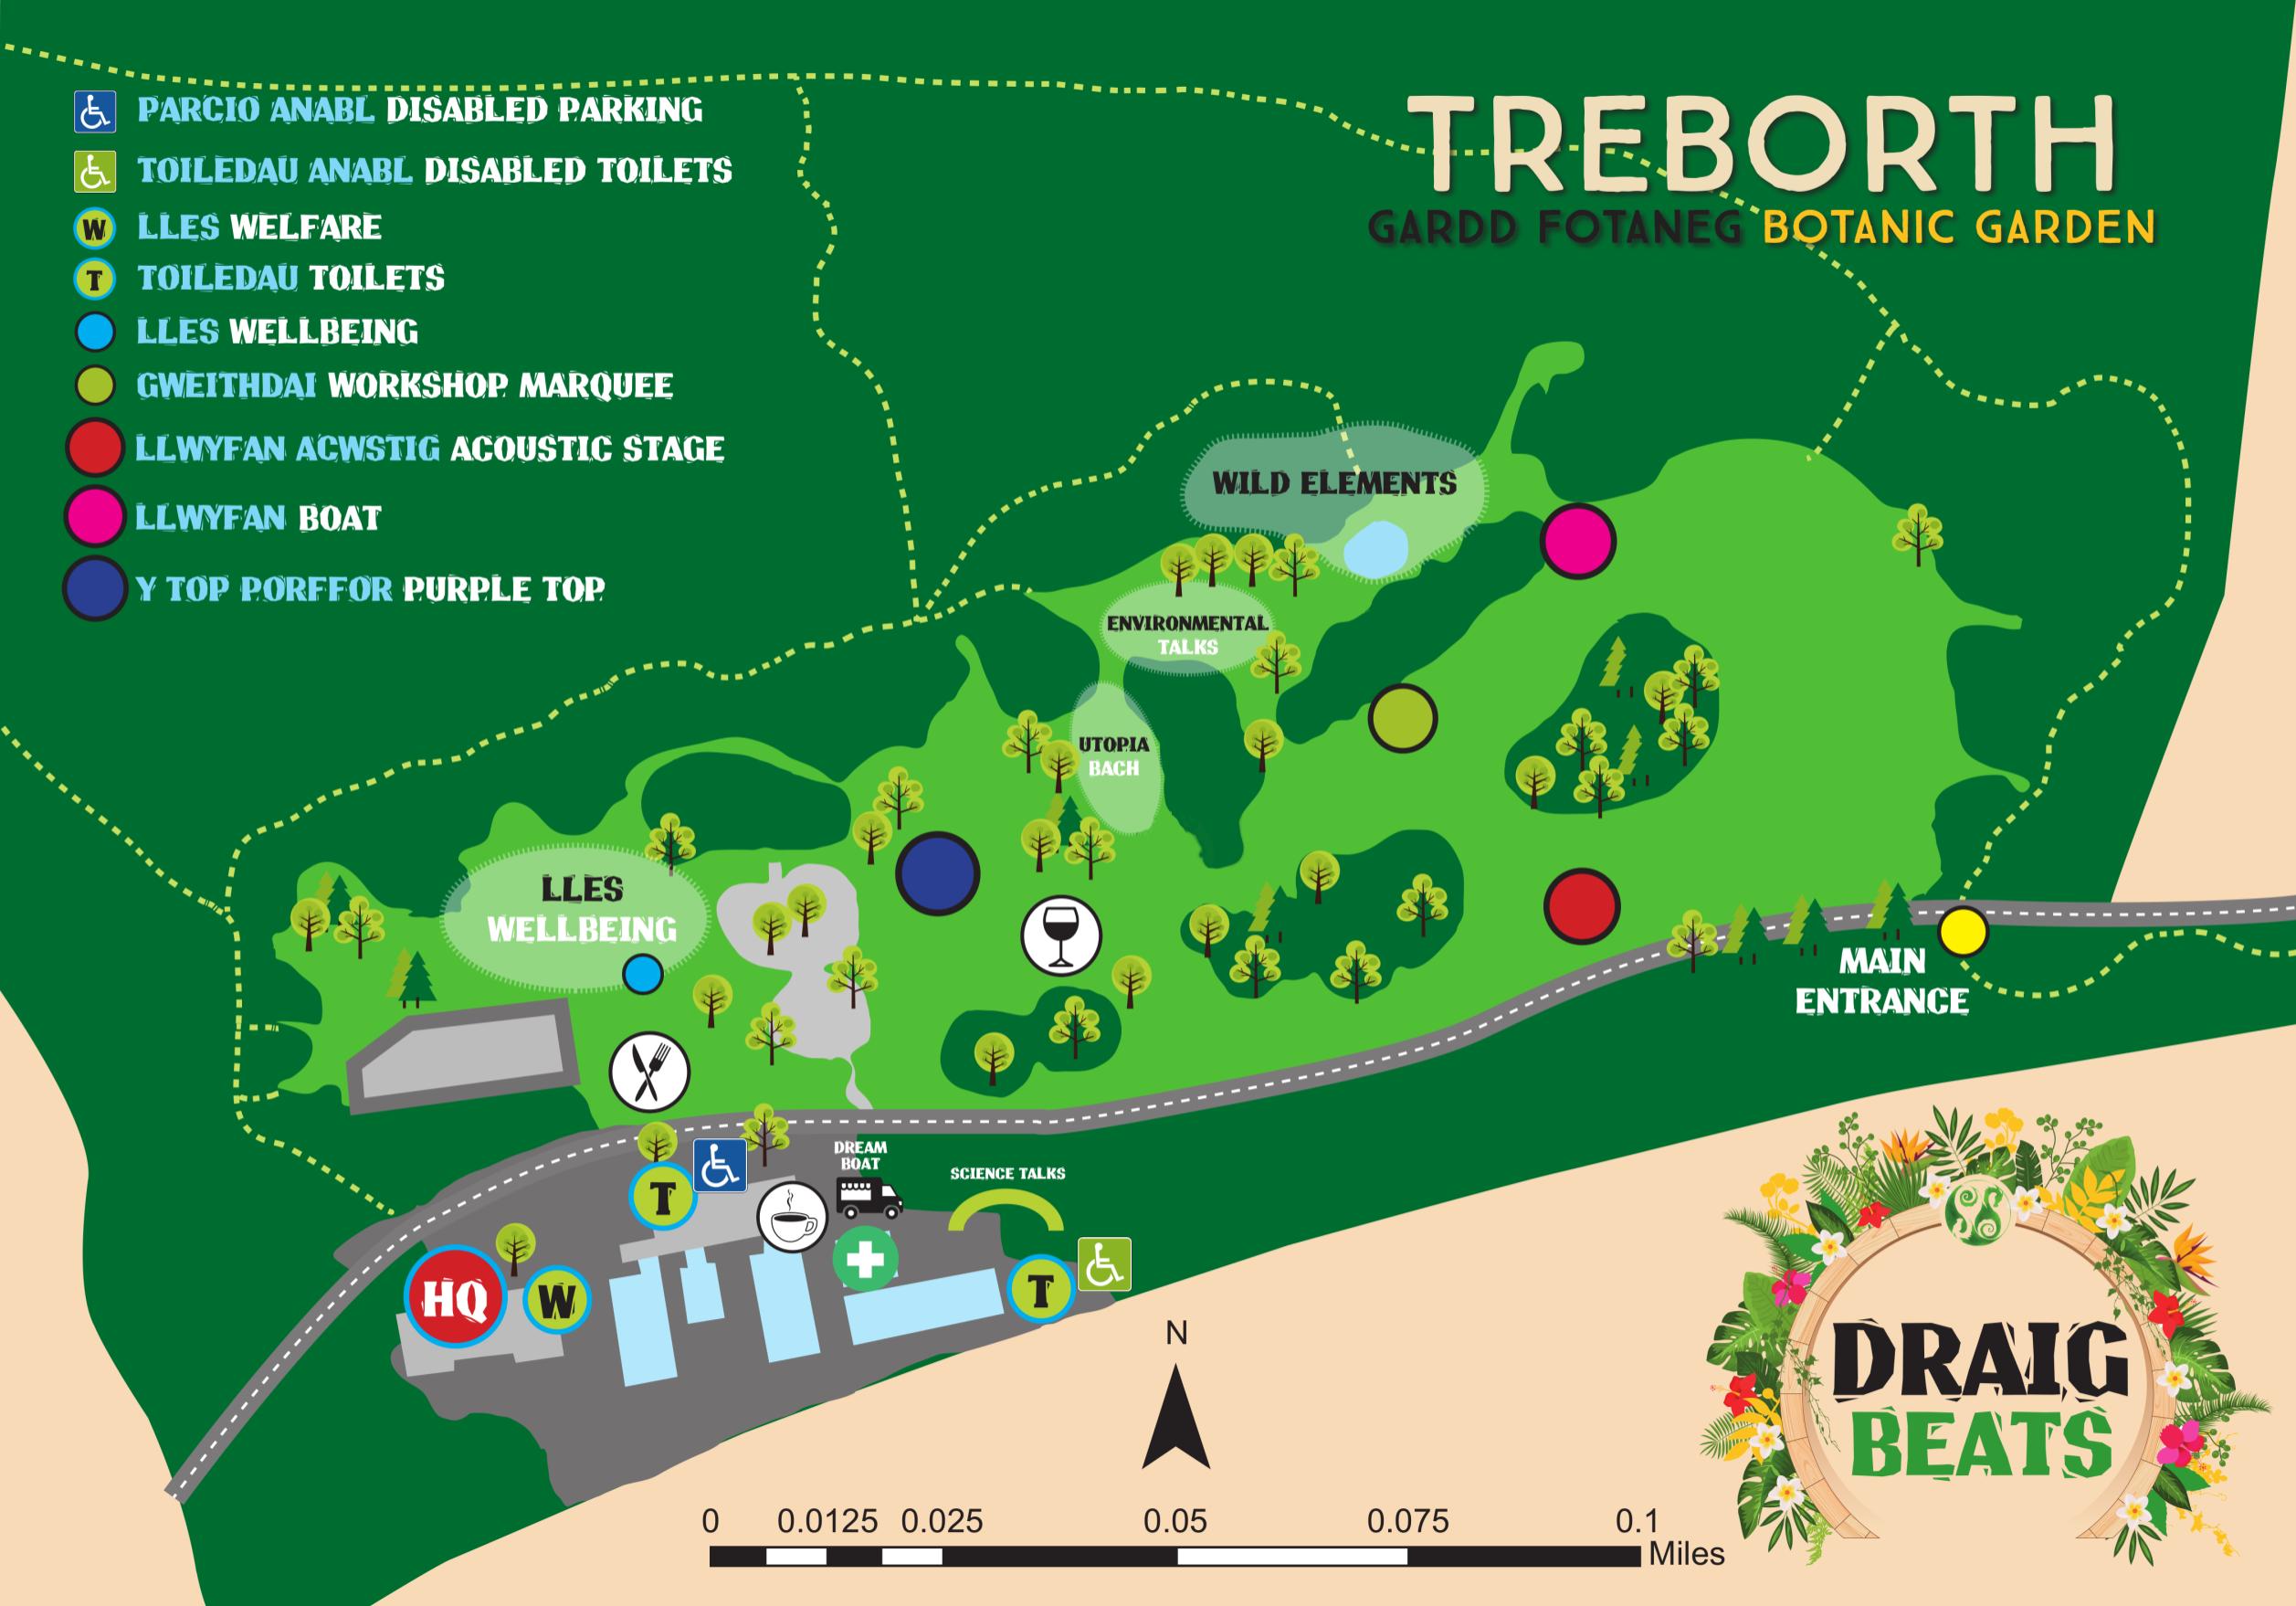 The site map